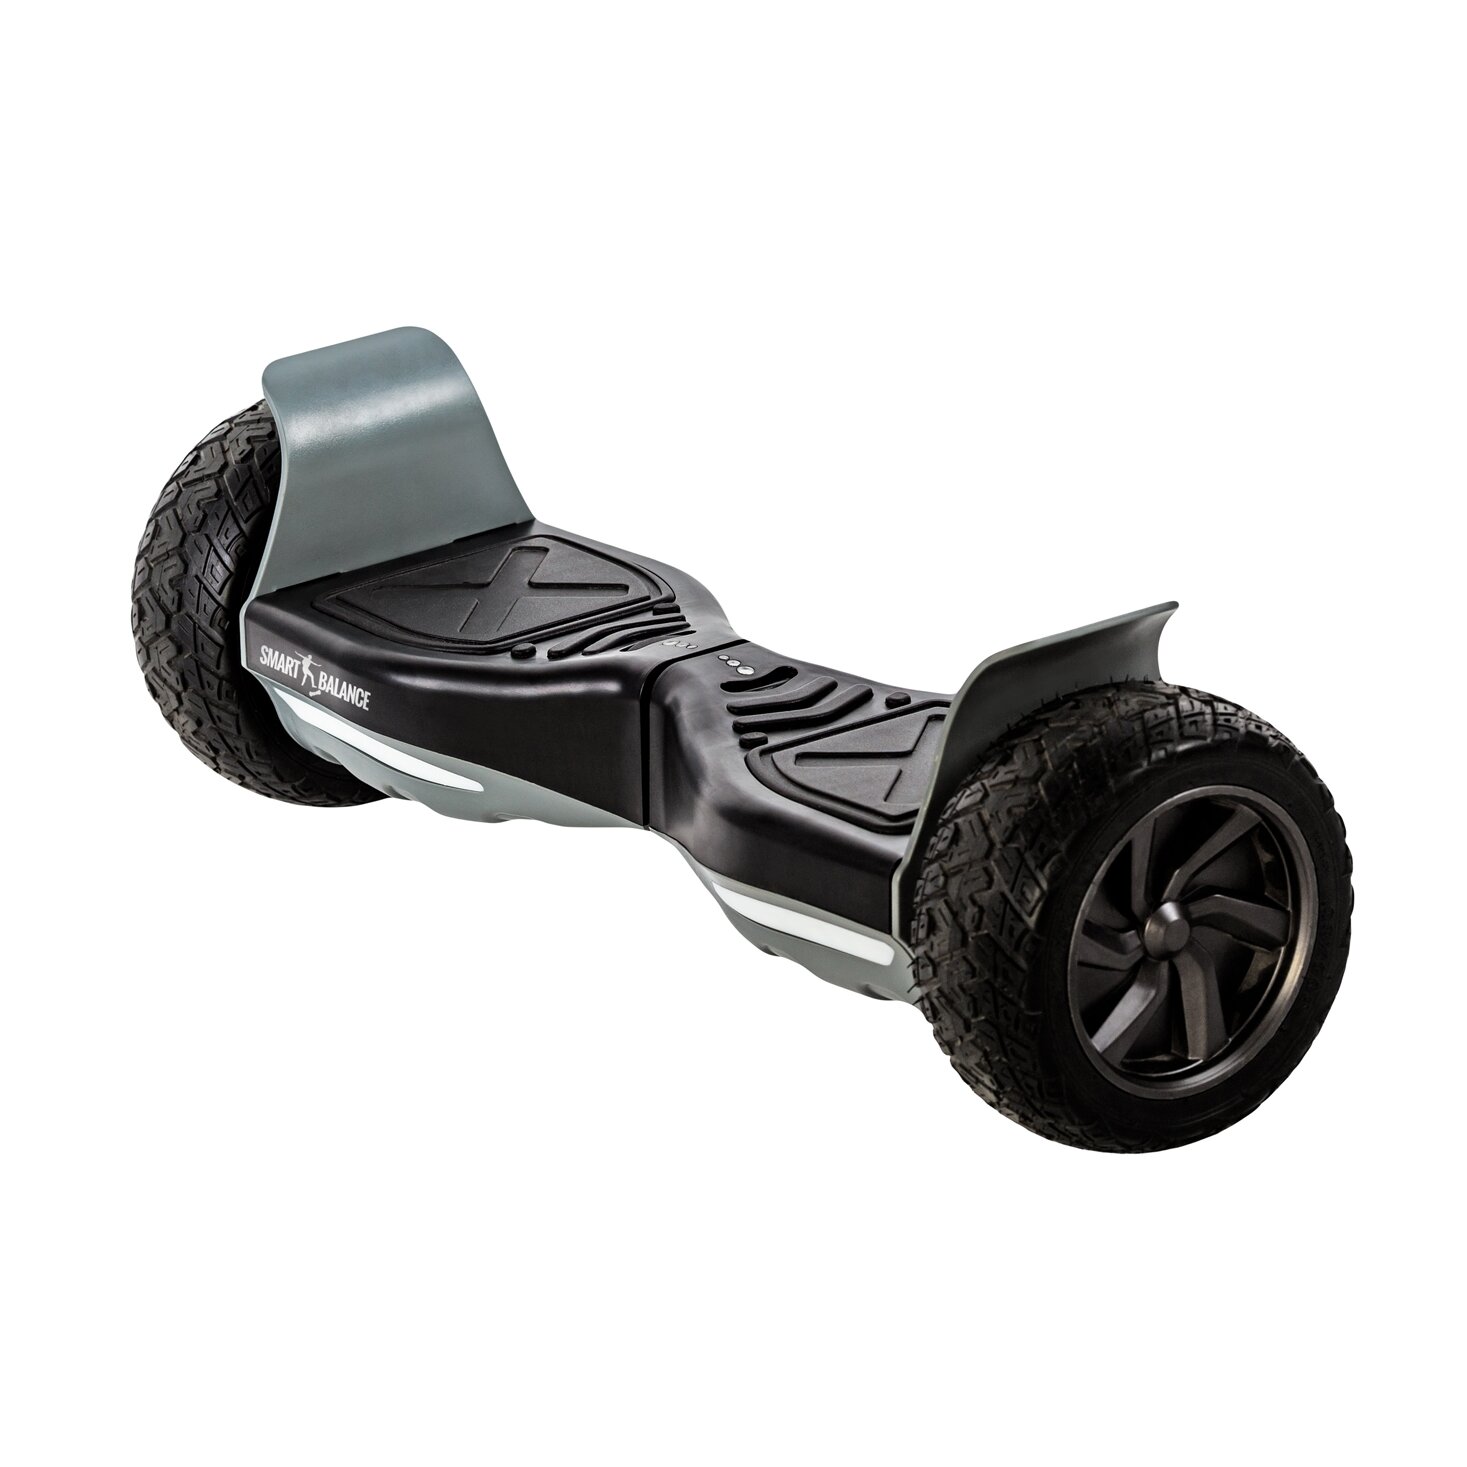 Package Hoverboard Smart Balance? Premium Brand, Hummer Black + Hoverseat, 8.5 inch, Bluetooth, Samsung Cell battery, Built-in speakers,  700W, LED